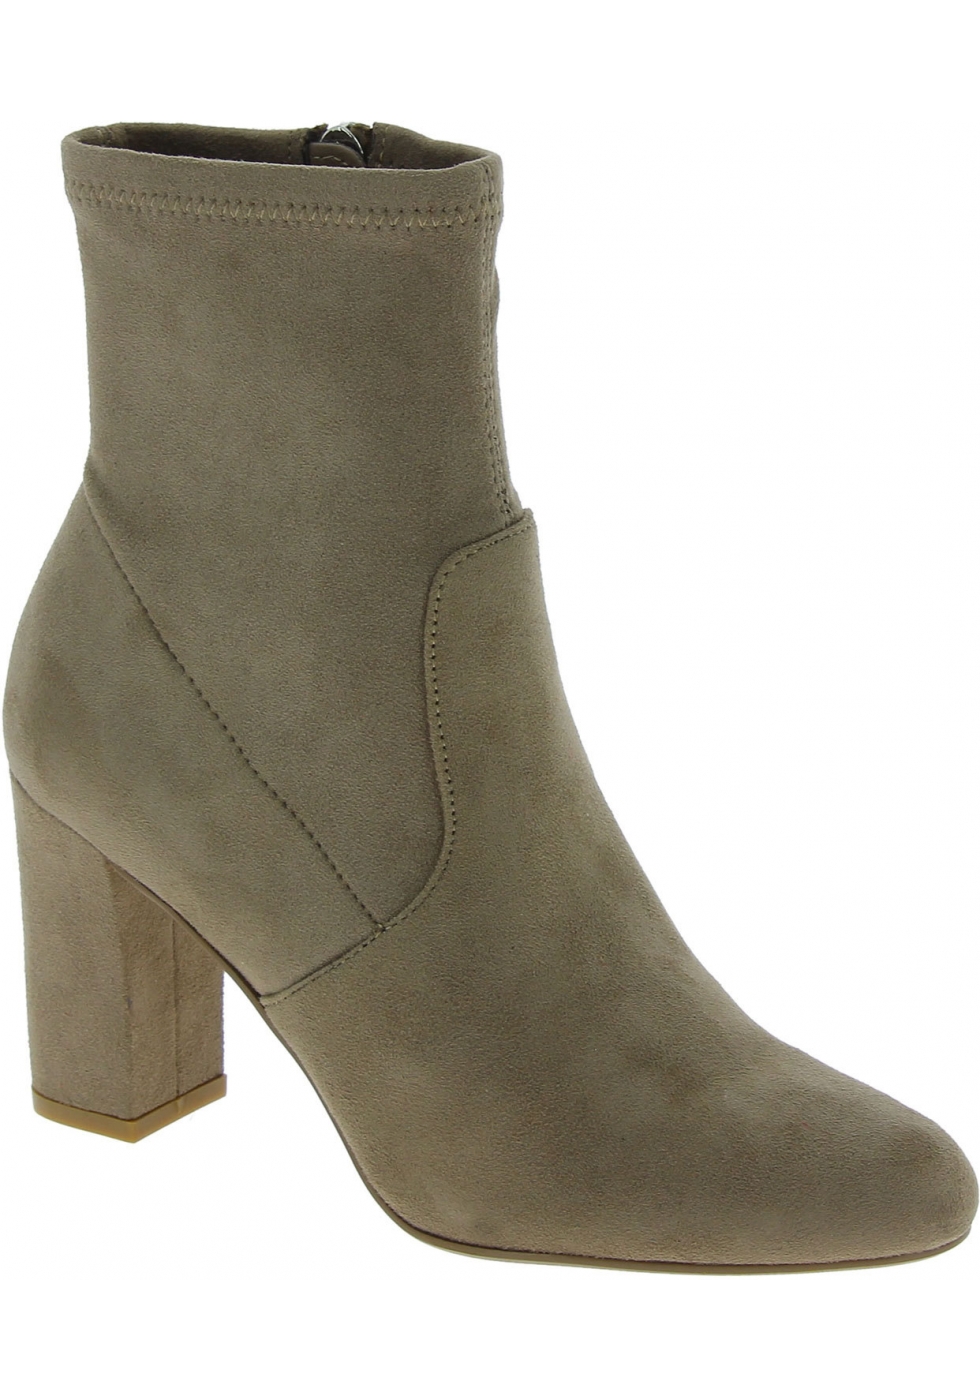 Steve Madden Women's block heels ankle boots in taupe suede effect ...